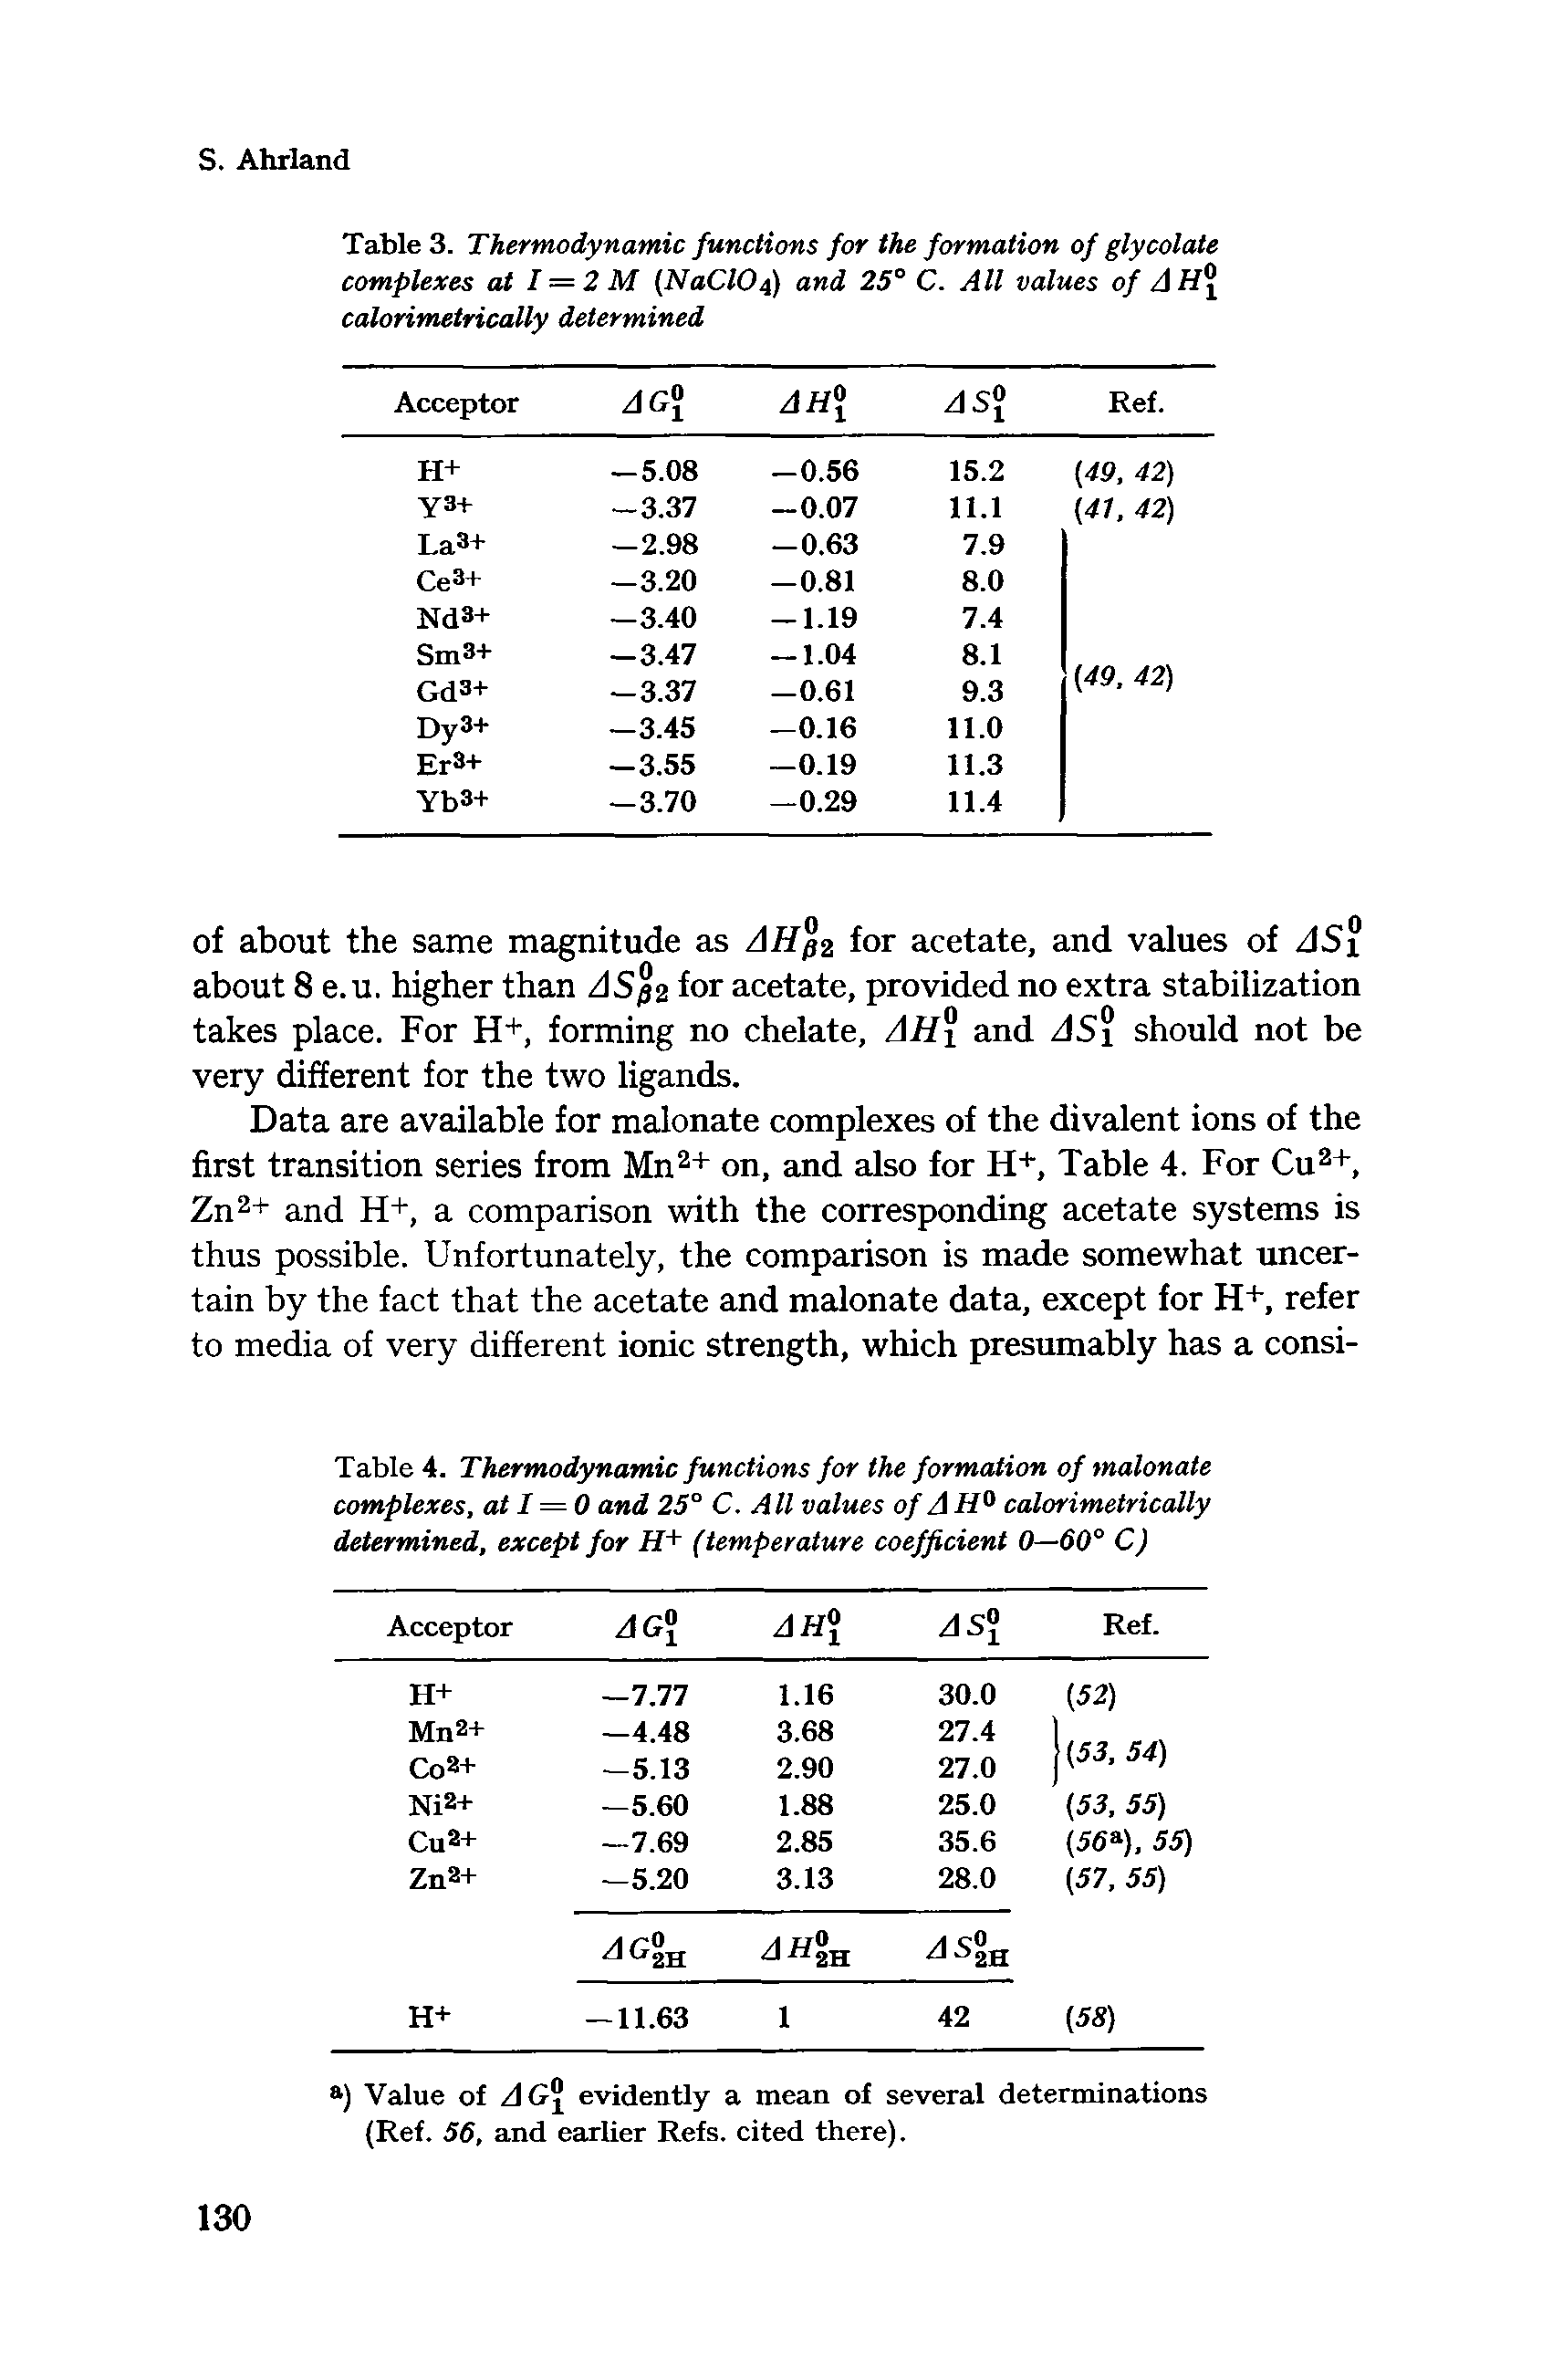 Table 4. Thermodynamic functions for the formation of malonate complexes, at 1 = 0 and 25° C. All values of A H° calorimetrically determined, except for H+ (temperature coefficient 0—60° C)...